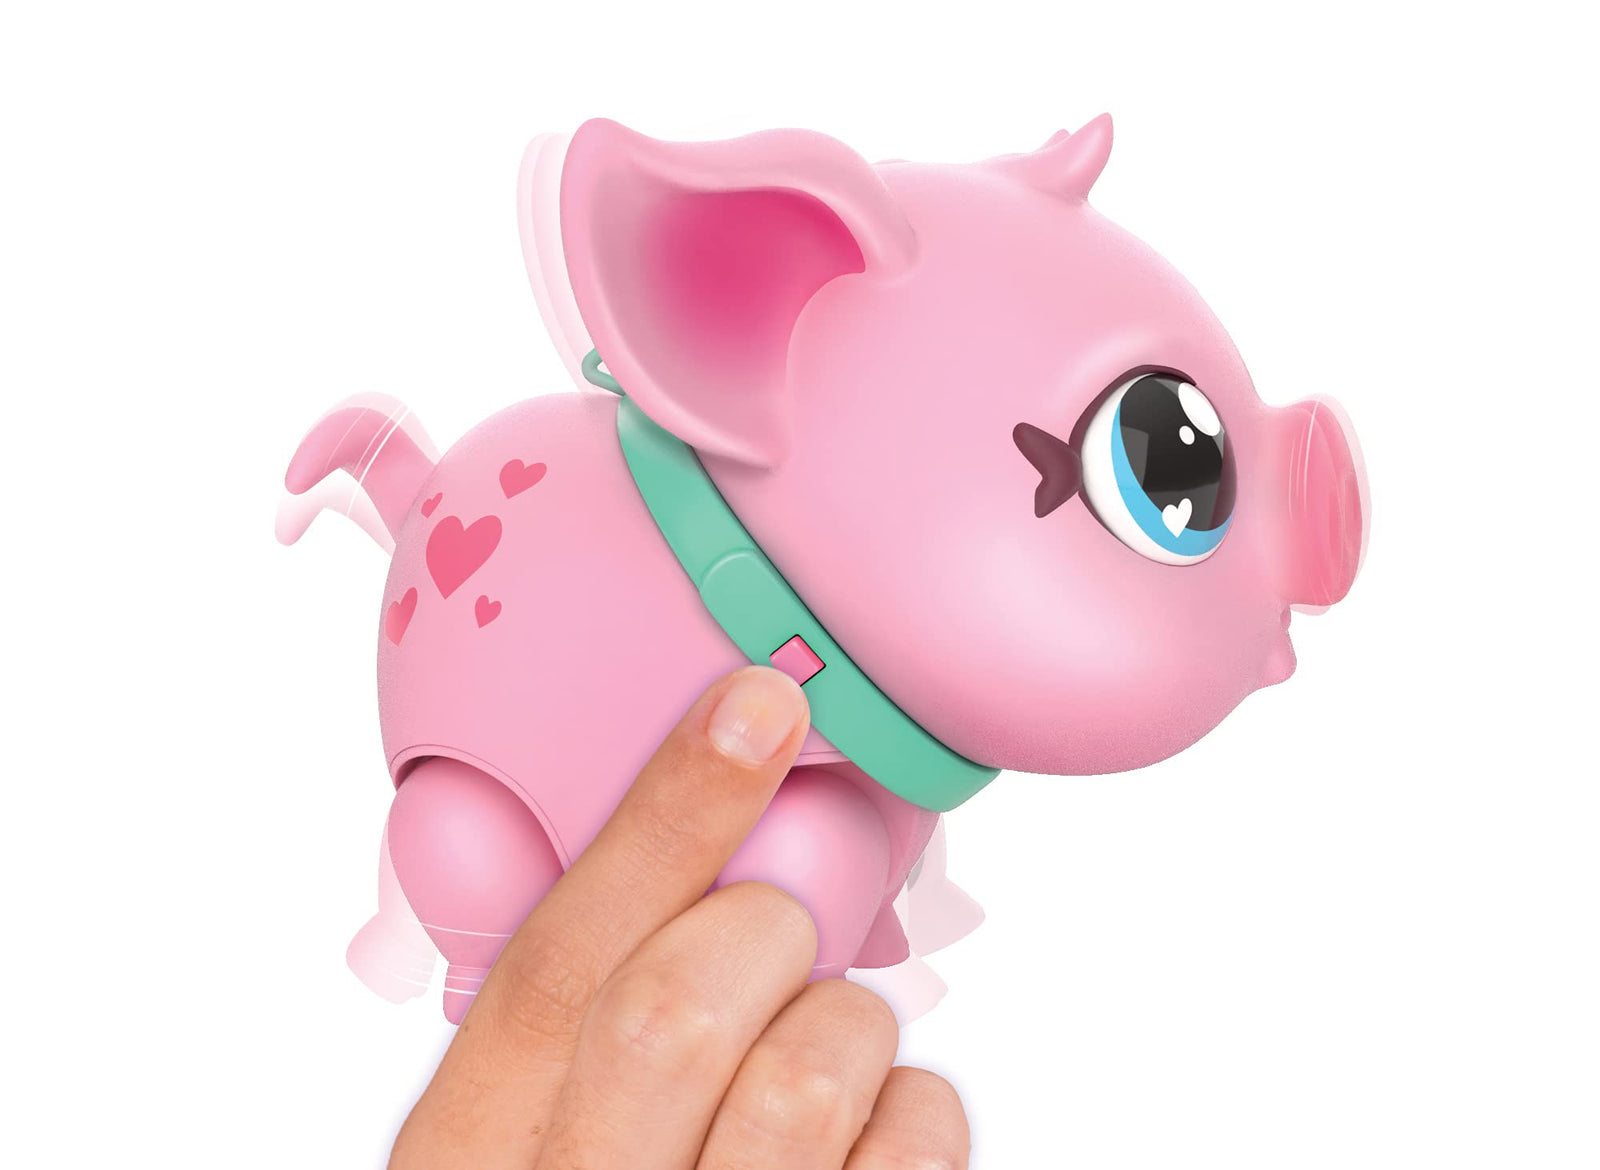 Little Live Pets - My Pet Pig: Piggly | Soft and Jiggly Interactive Toy Pig That Walks, Dances and Nuzzles. 20+ Sounds & Reactions. Batteries Included. for Kids Ages 4+